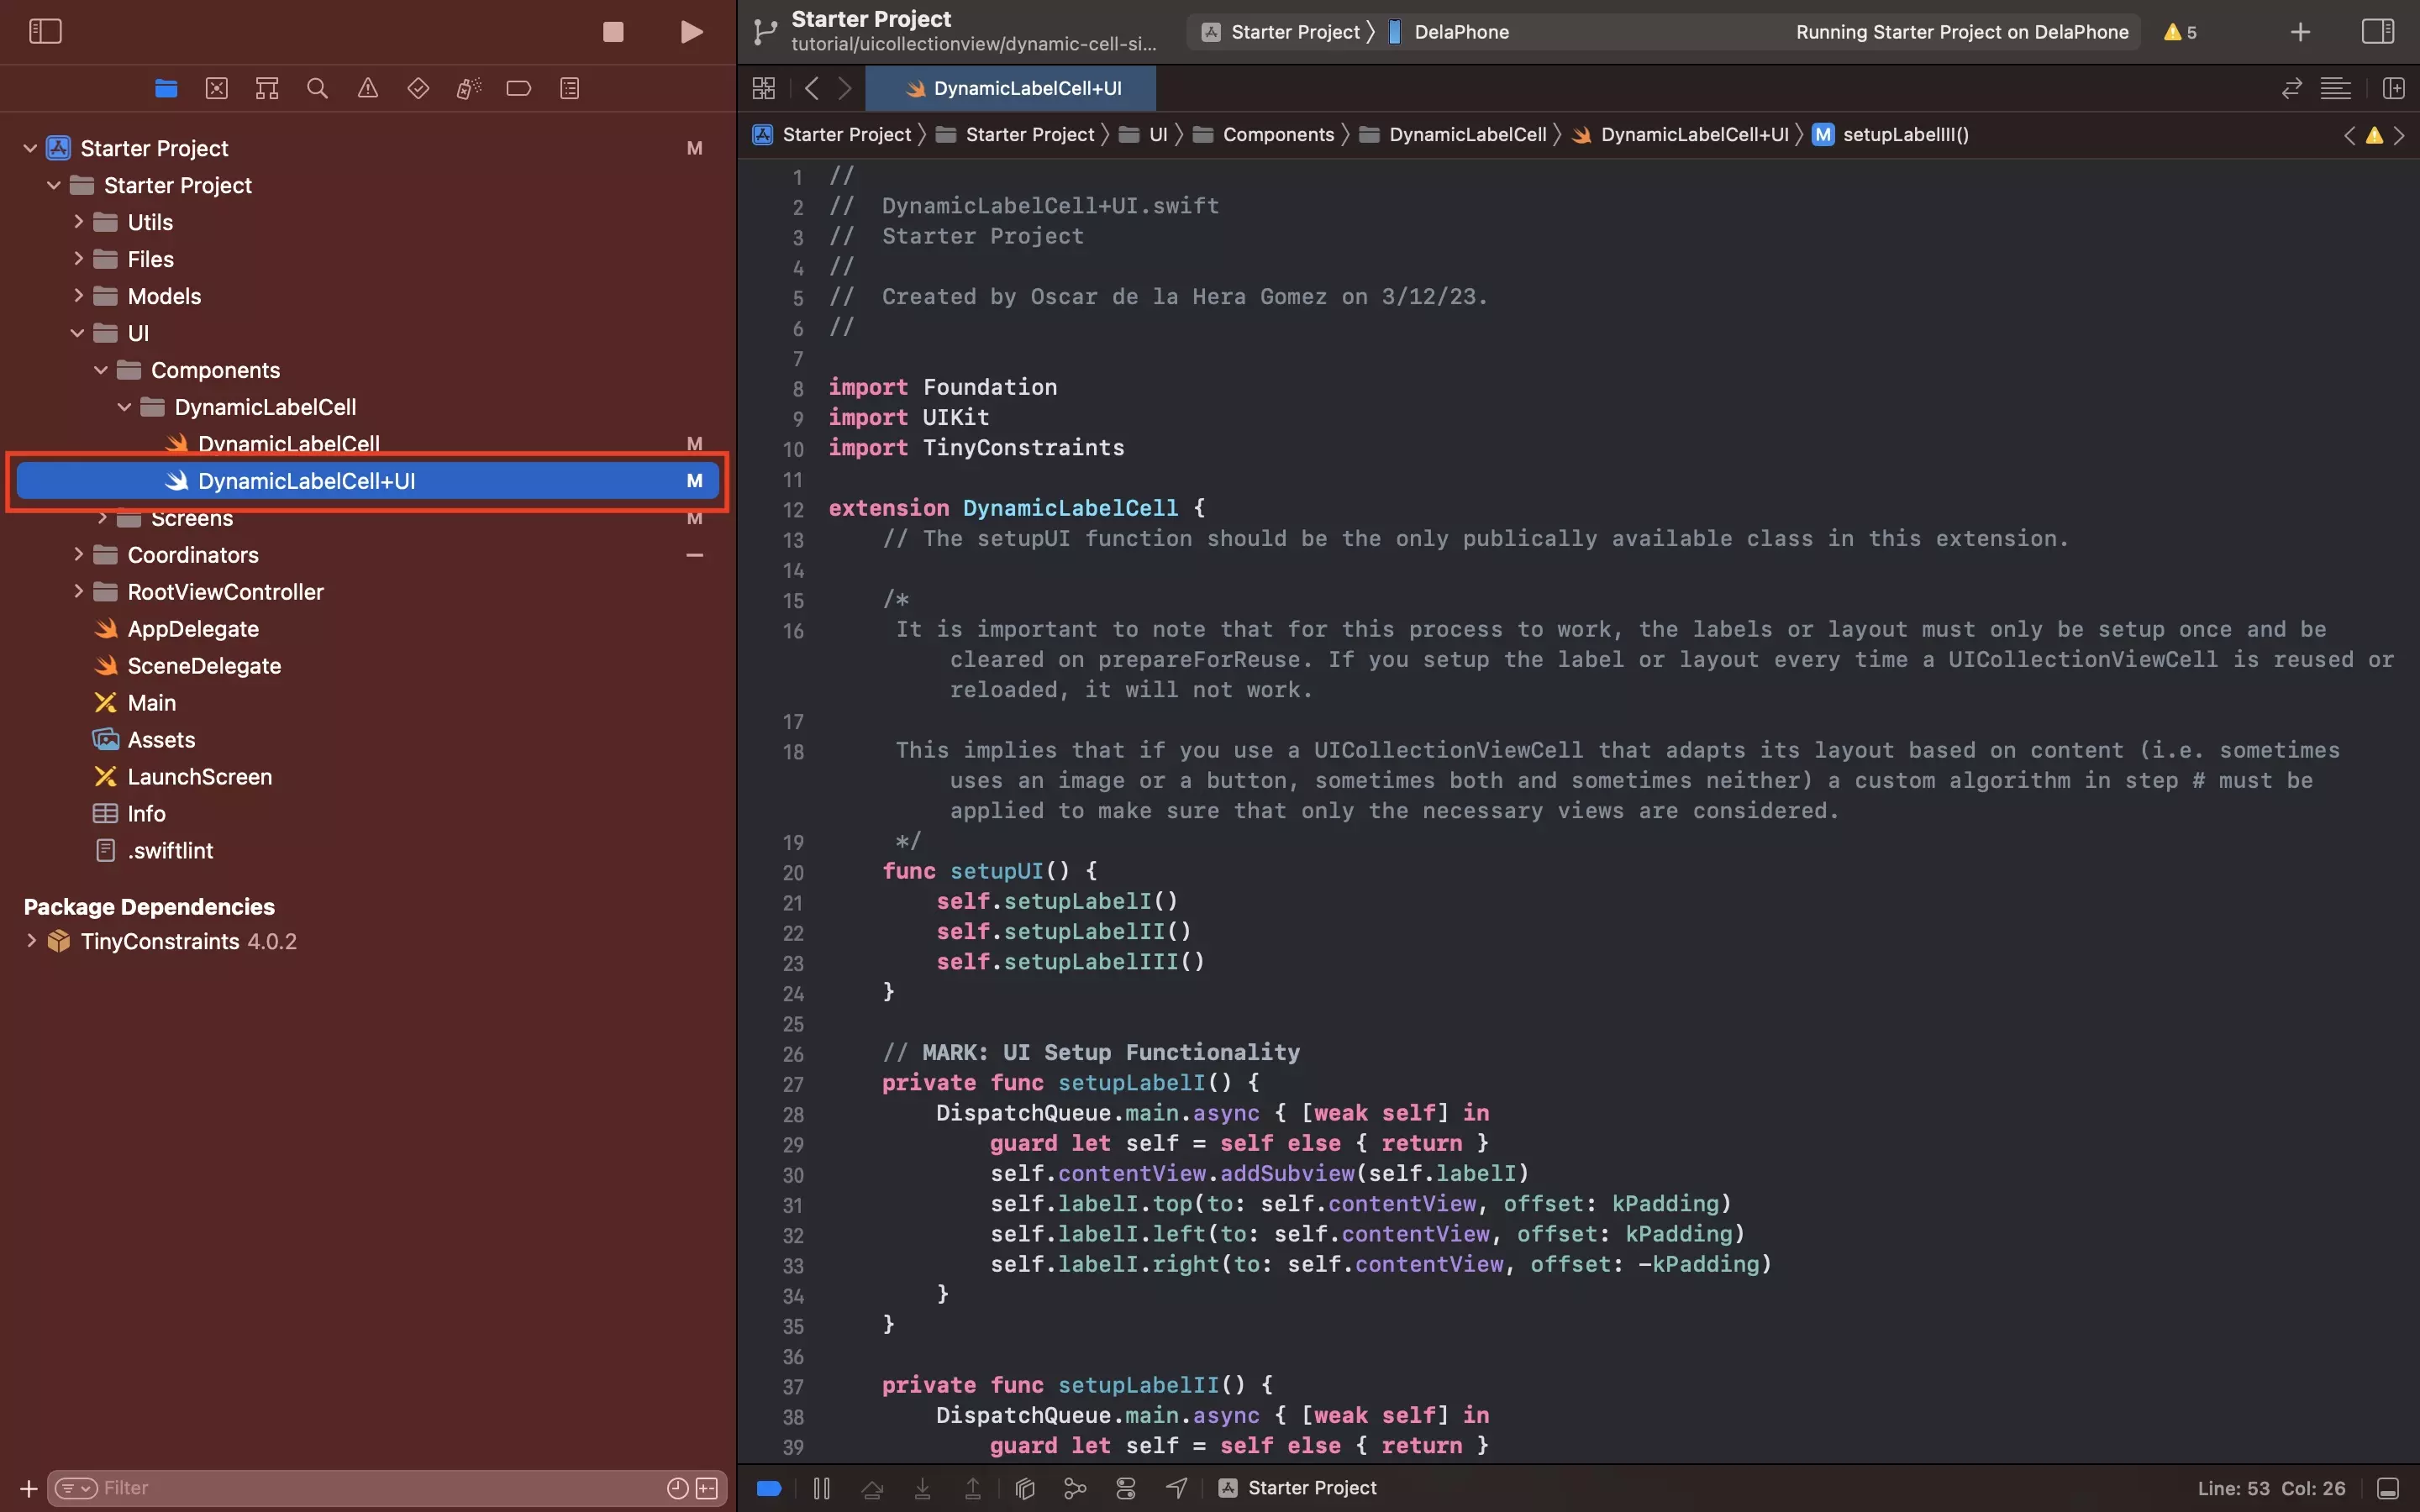 A screenshot of the newly created DynamicLabelCell+UI.swift file in XCode. Code available below.